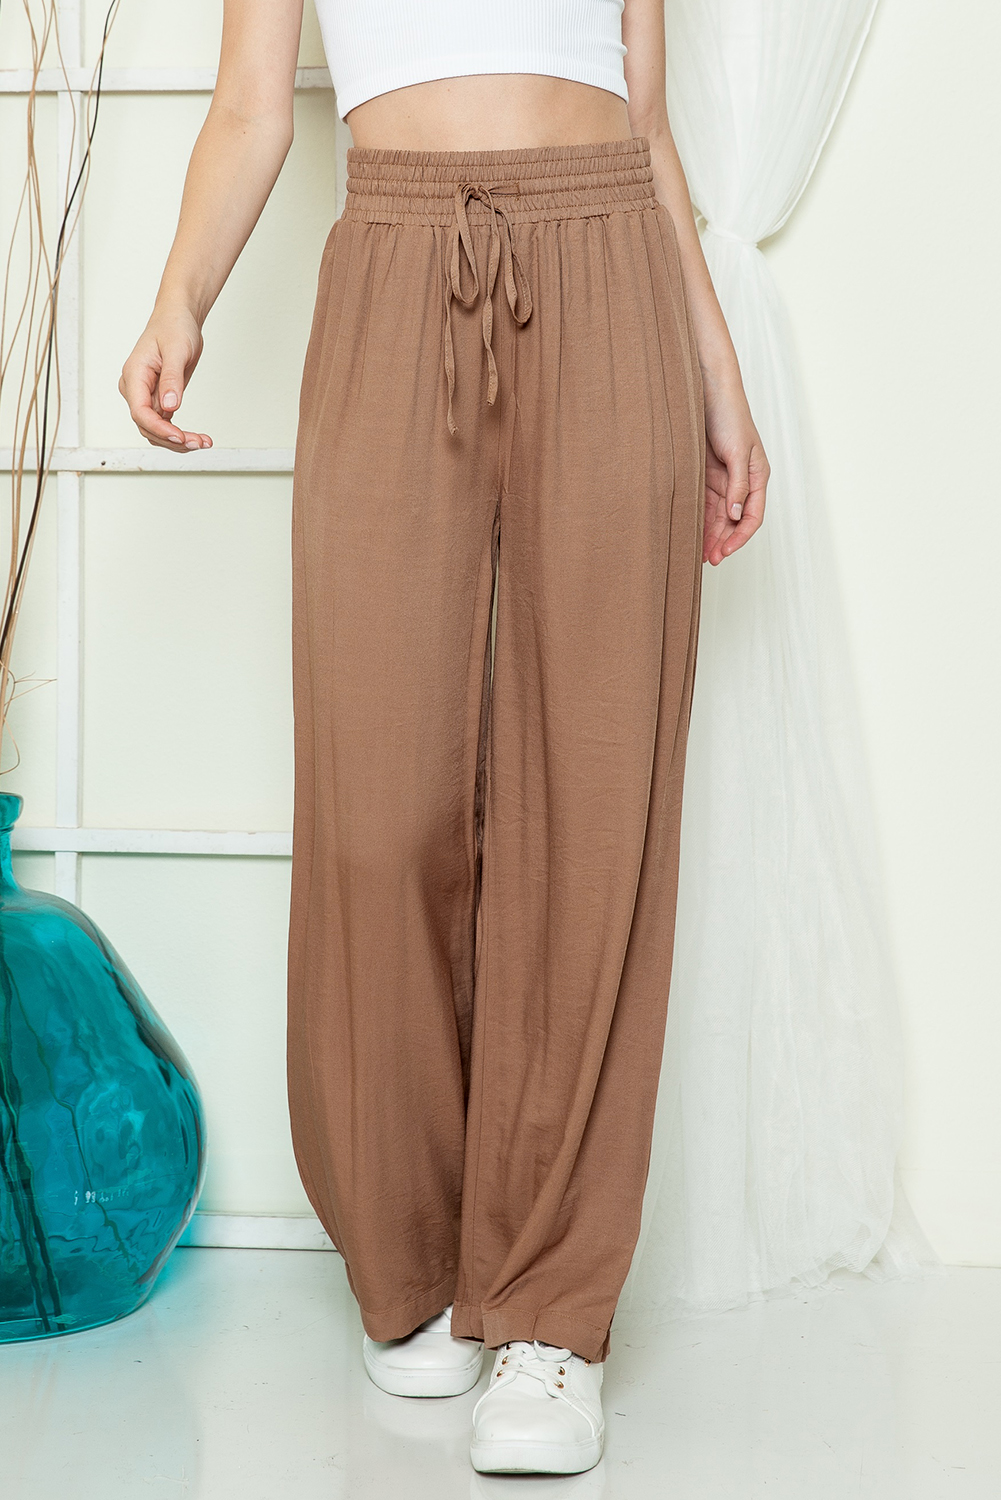 Shewin Wholesale NEW arrival Brown Casual Drawstring Shirred Elastic Waist Wide Leg Pants